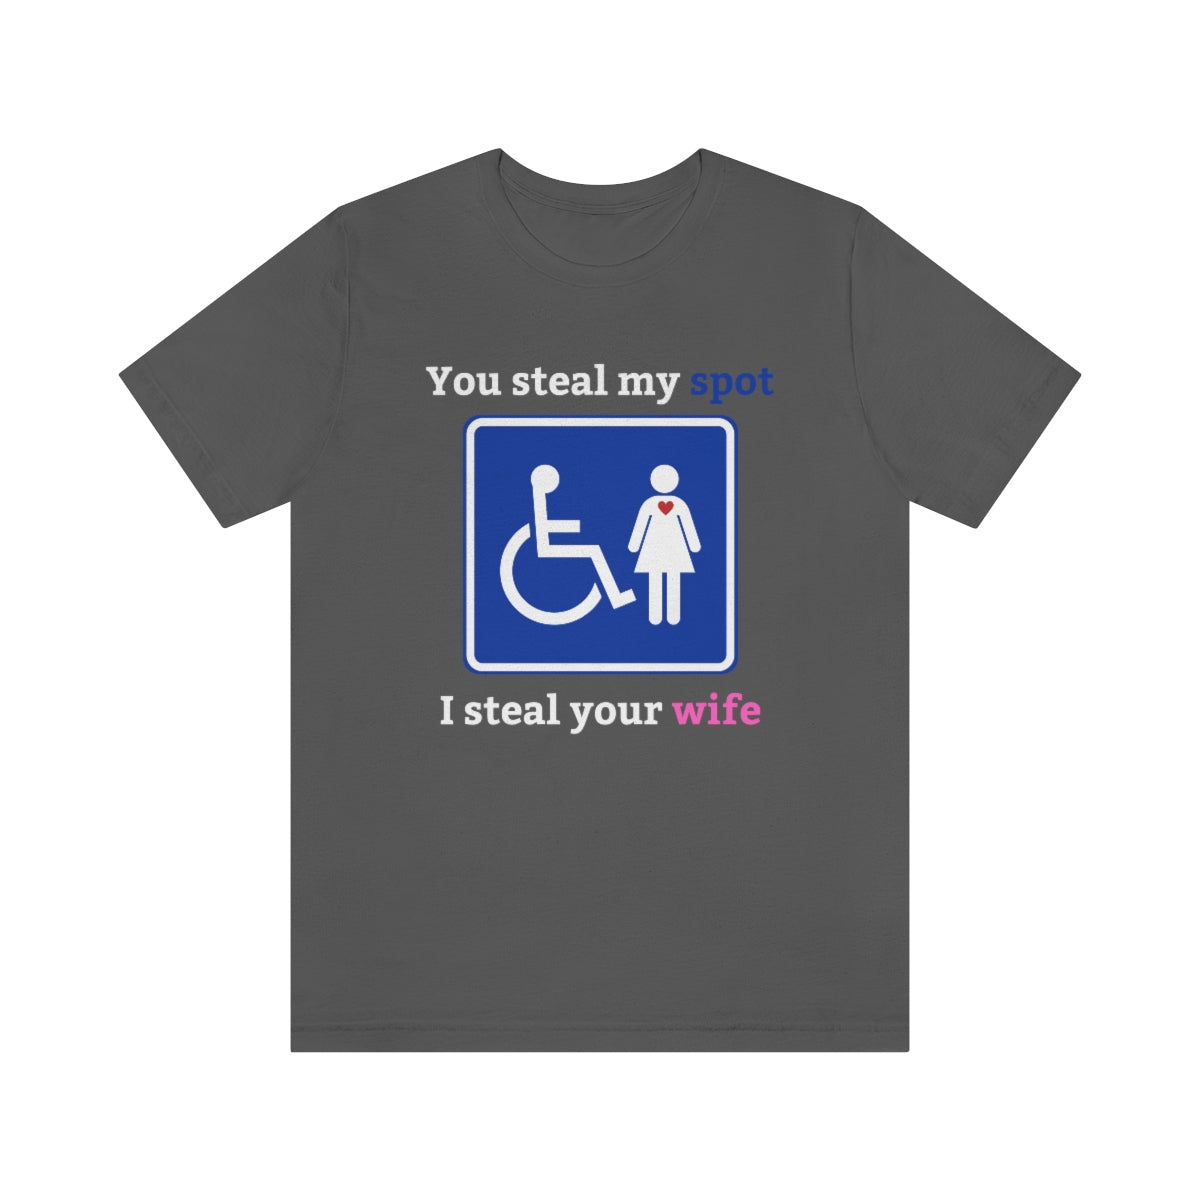 An asphalt-colored t-shirt with the text "You steal my spot, I steal your wife" with a handicap sign with a person and woman on it